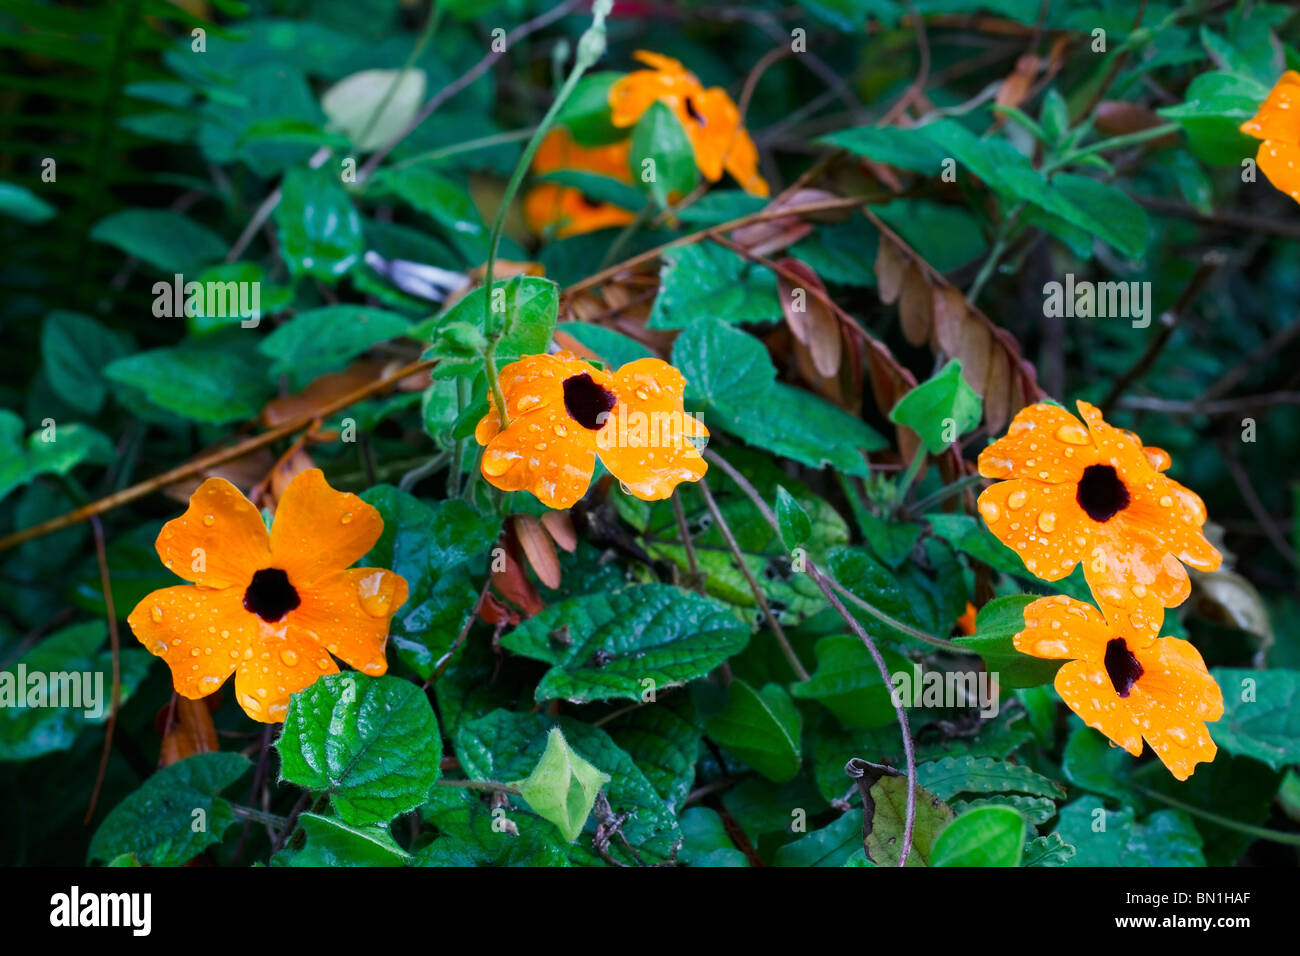 Black-eyed Susan flowers after rain. Order: Lamiales, Family: Acanthaceae, Genus: Thunbergia, Species: T. Alata. South Africa. Stock Photo